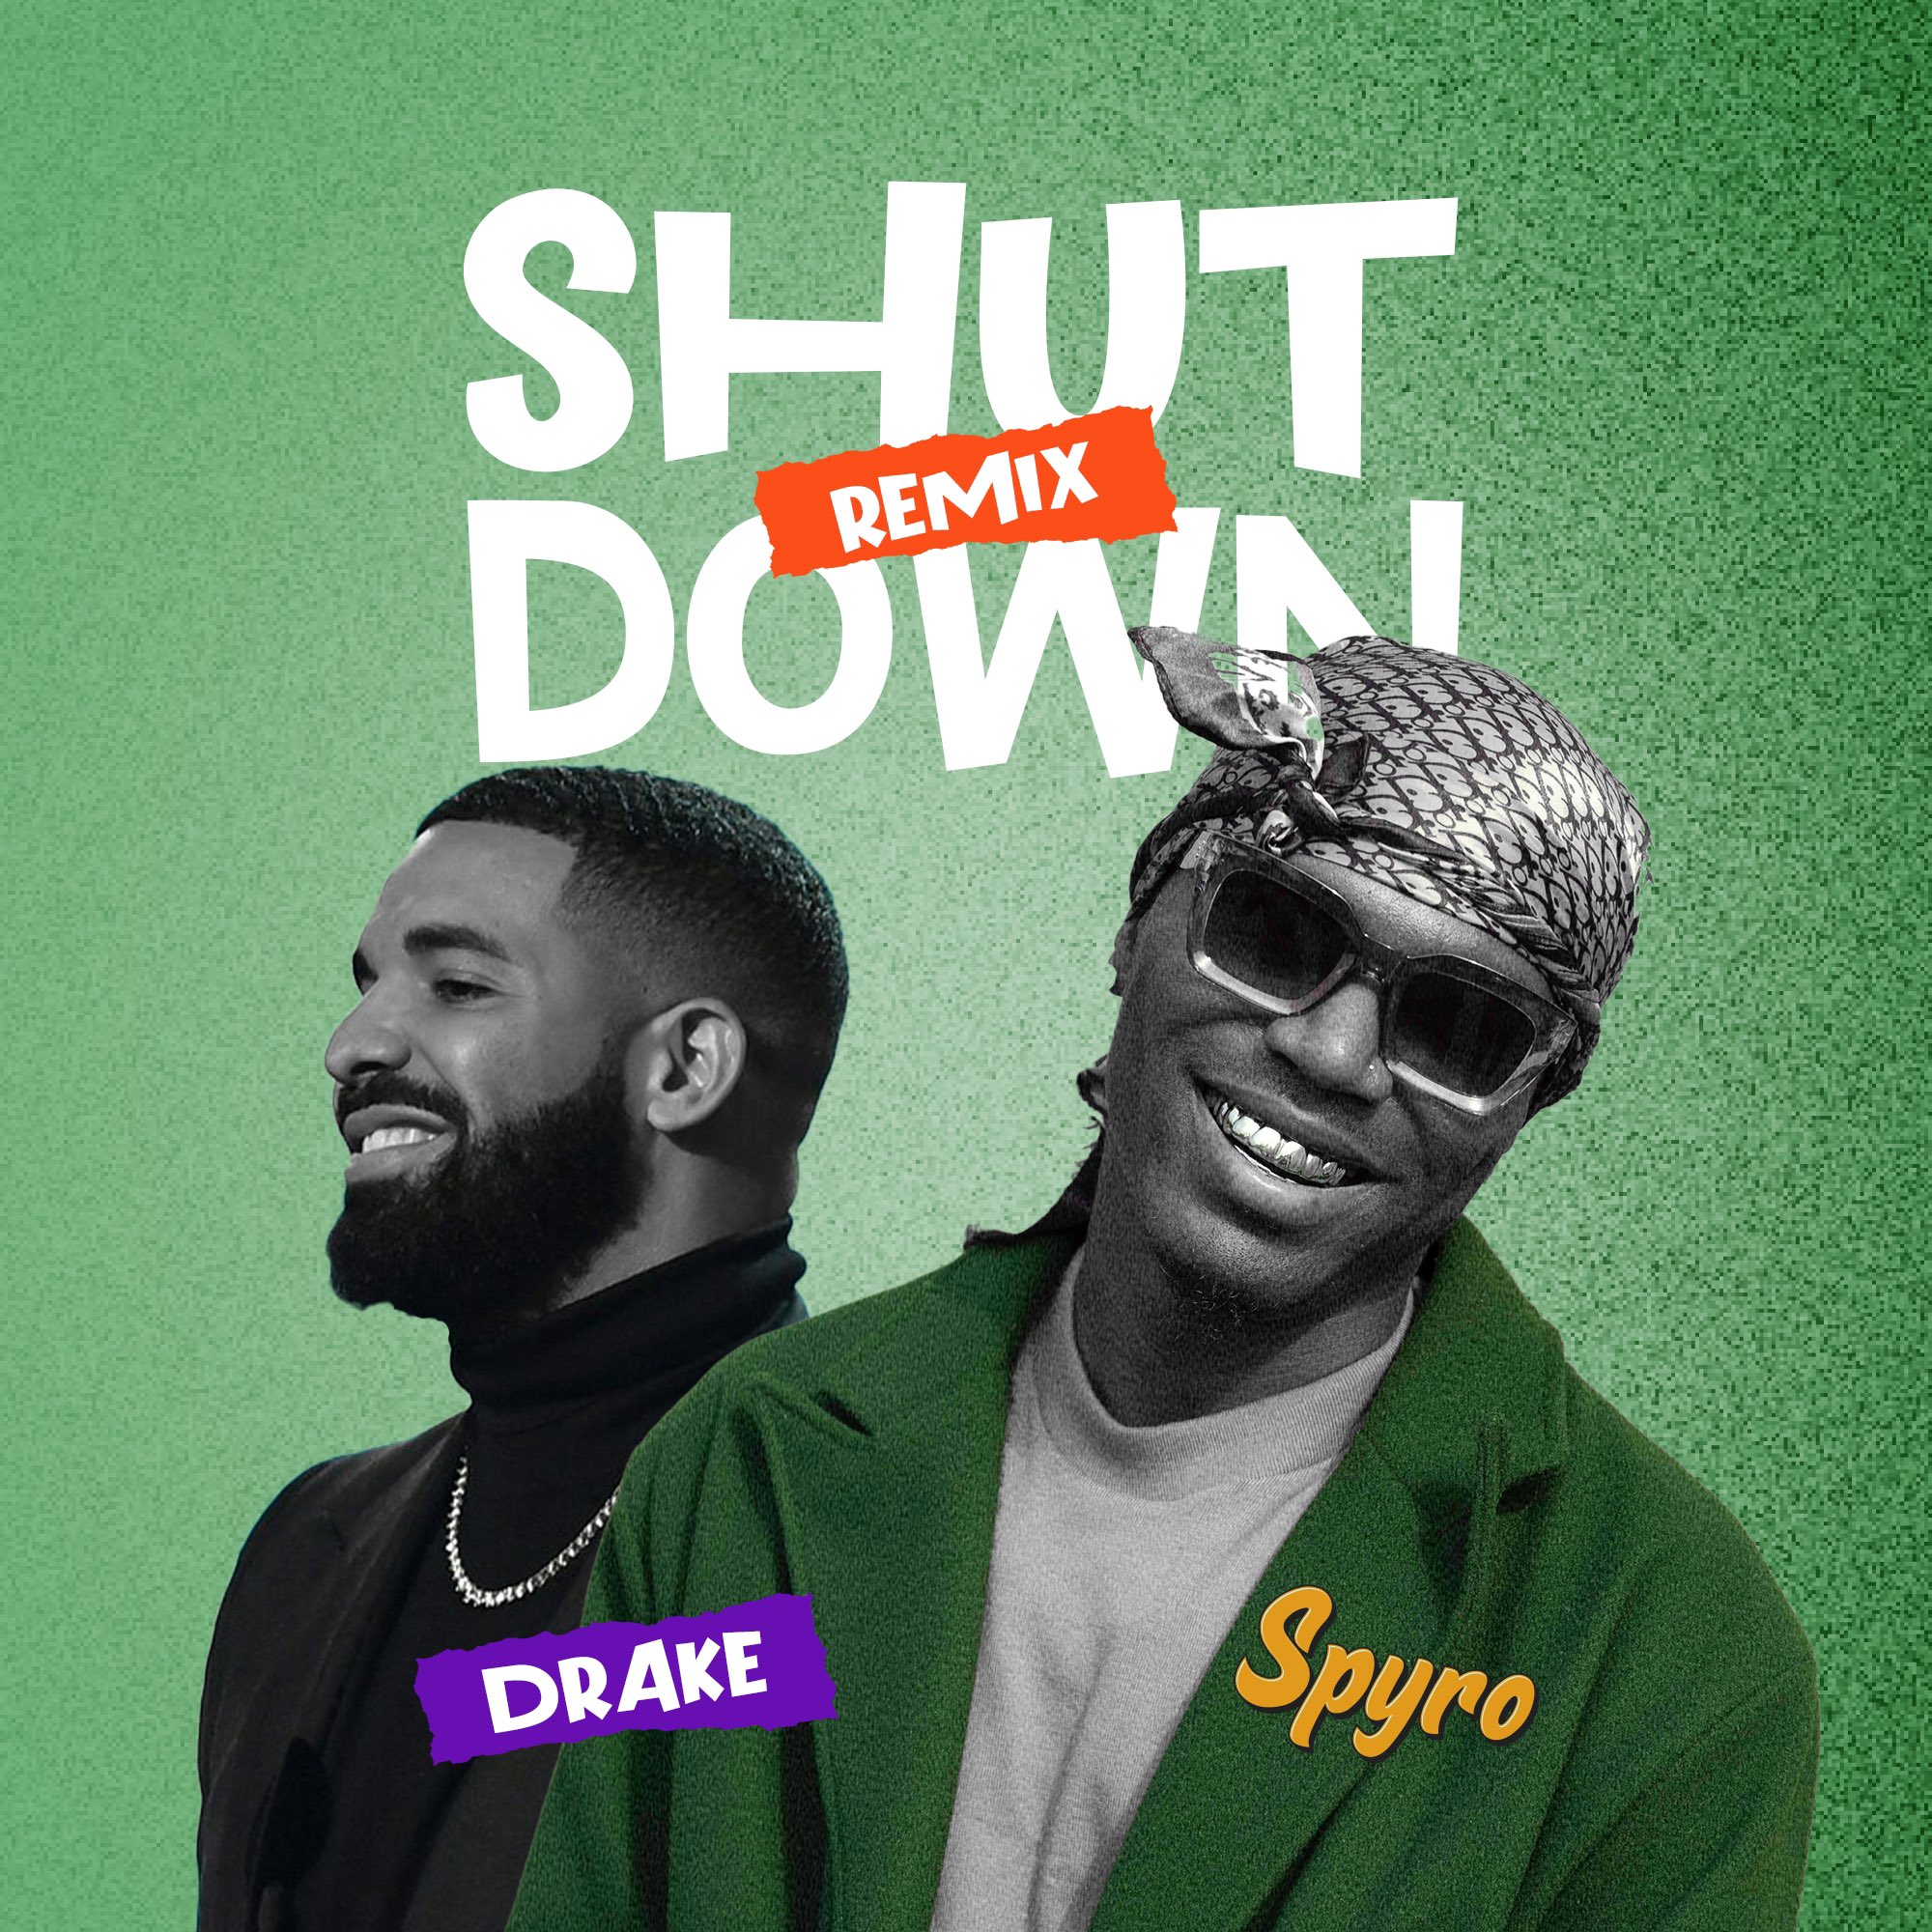 Spyro reportedly set to collaborate with Drake on Shut Down remix